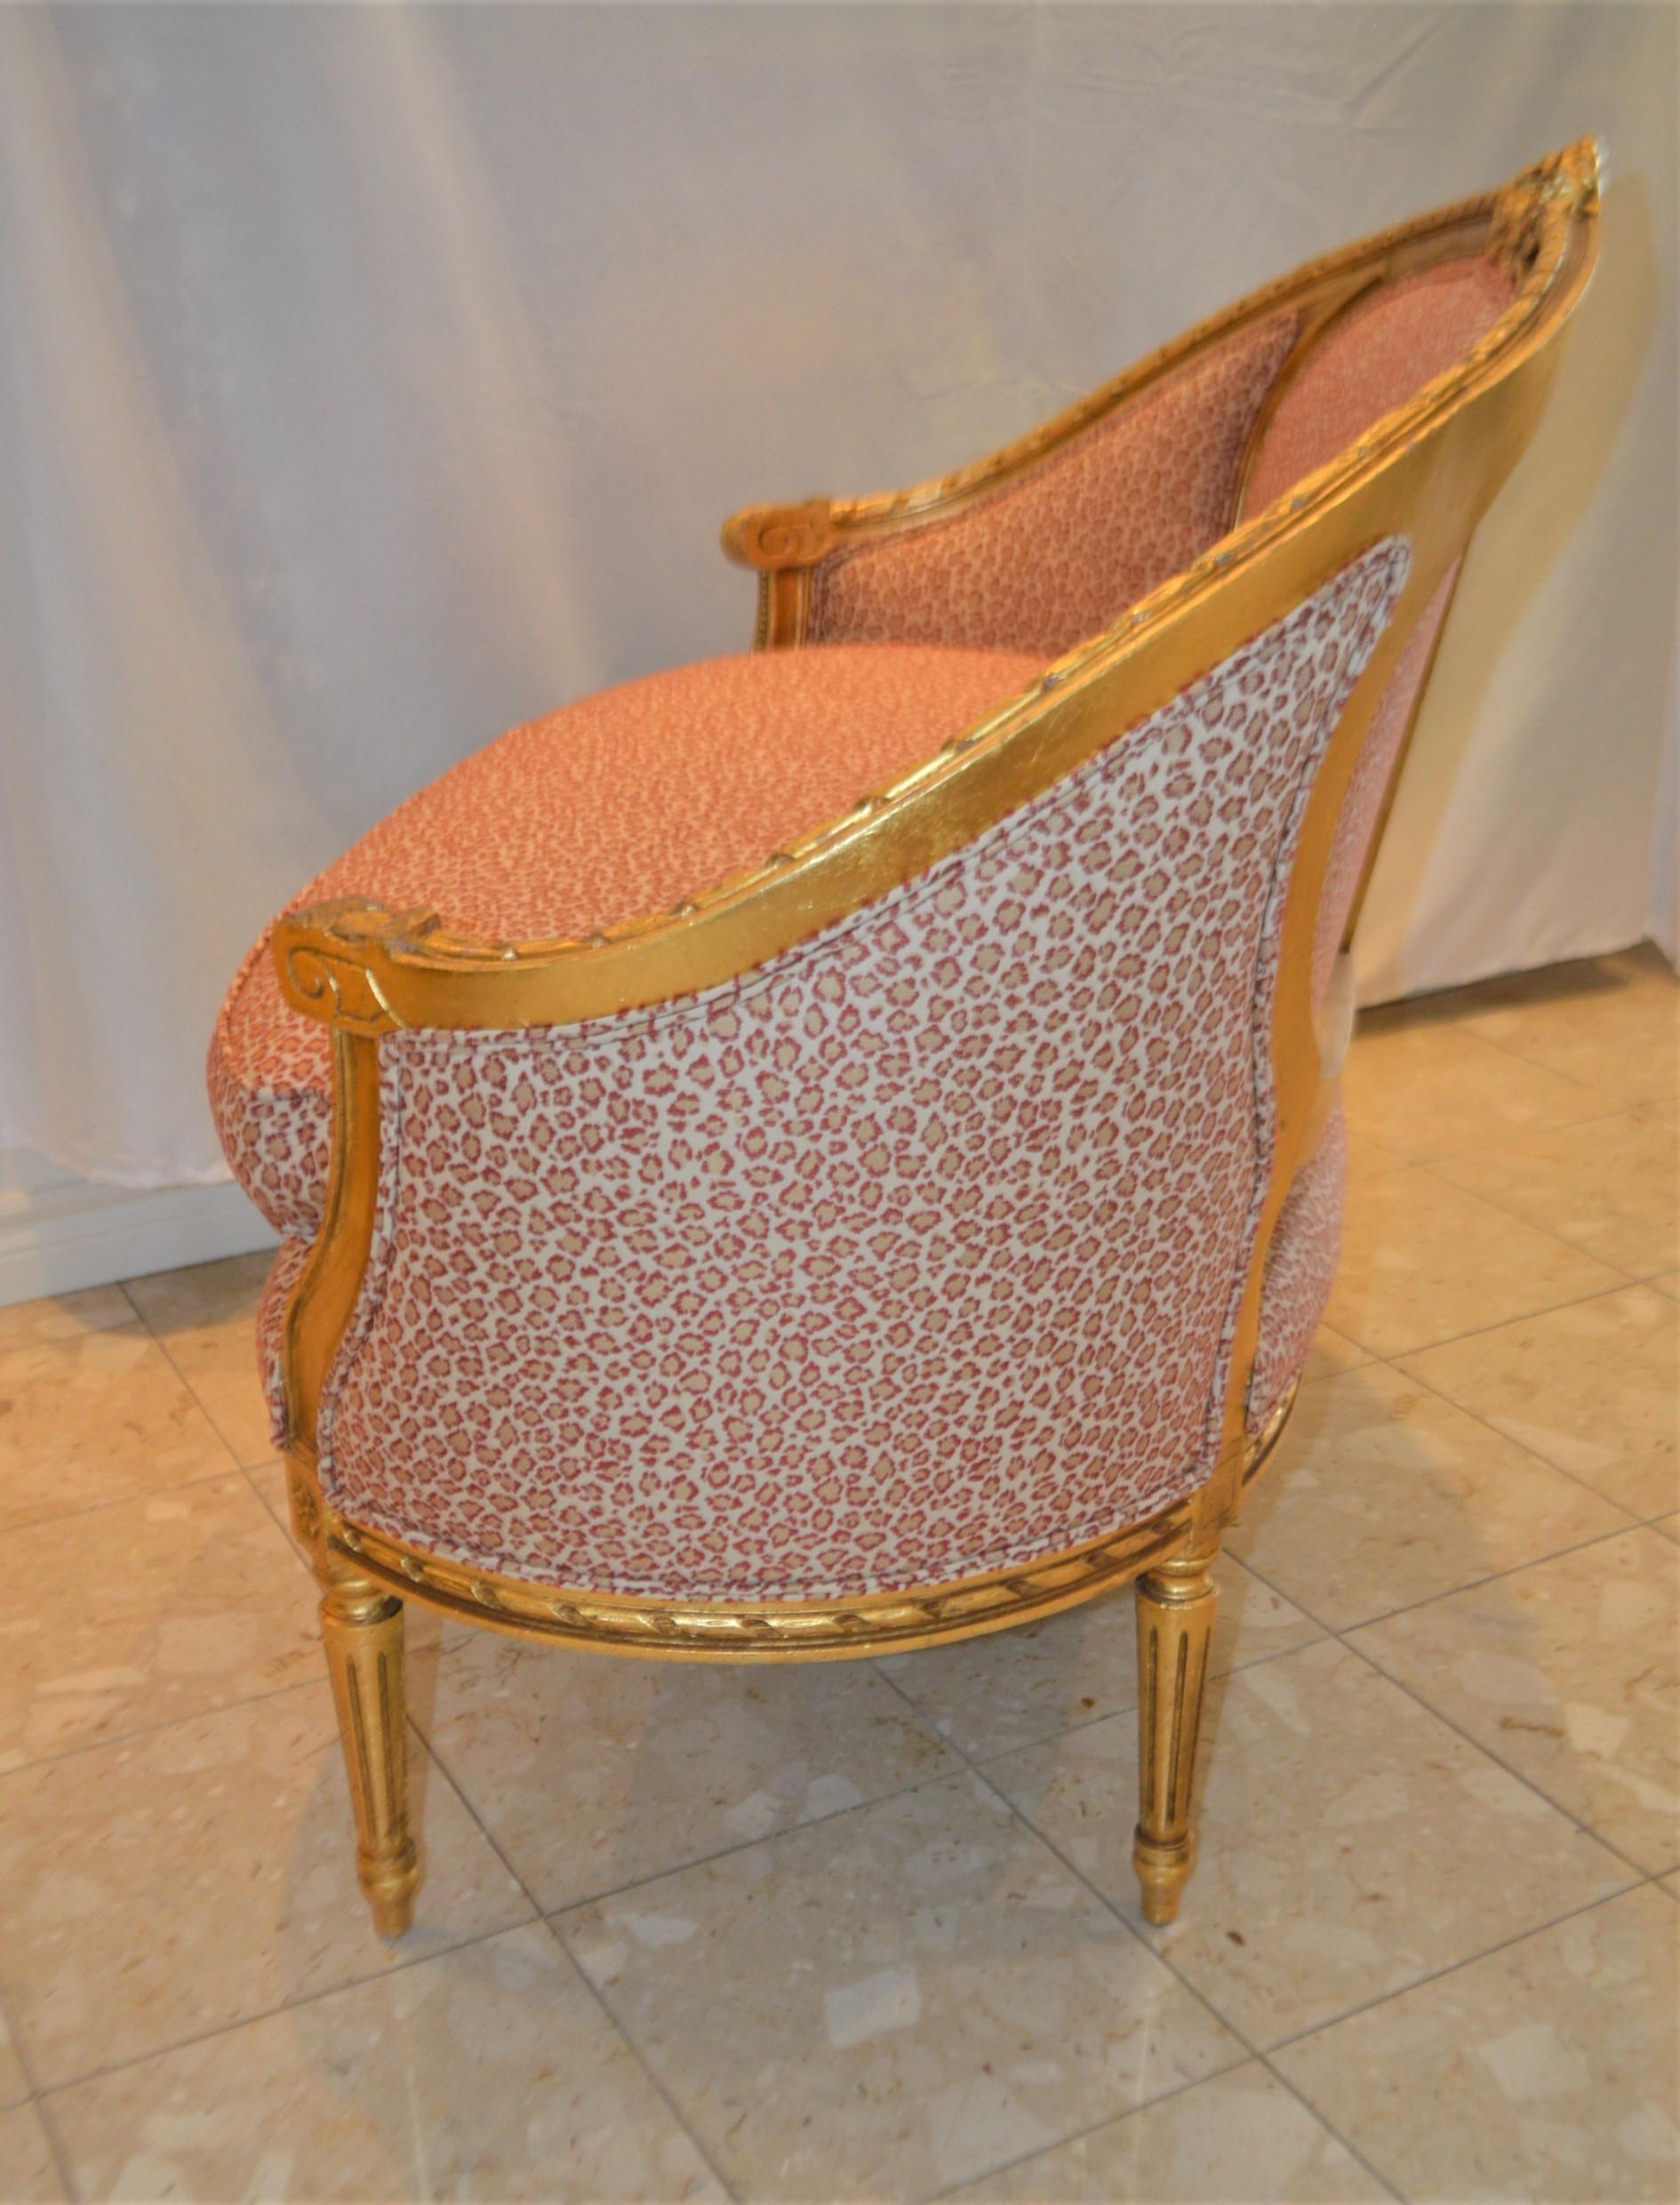 Wood Louis XVI style gilded settee with pink and cream fabric.